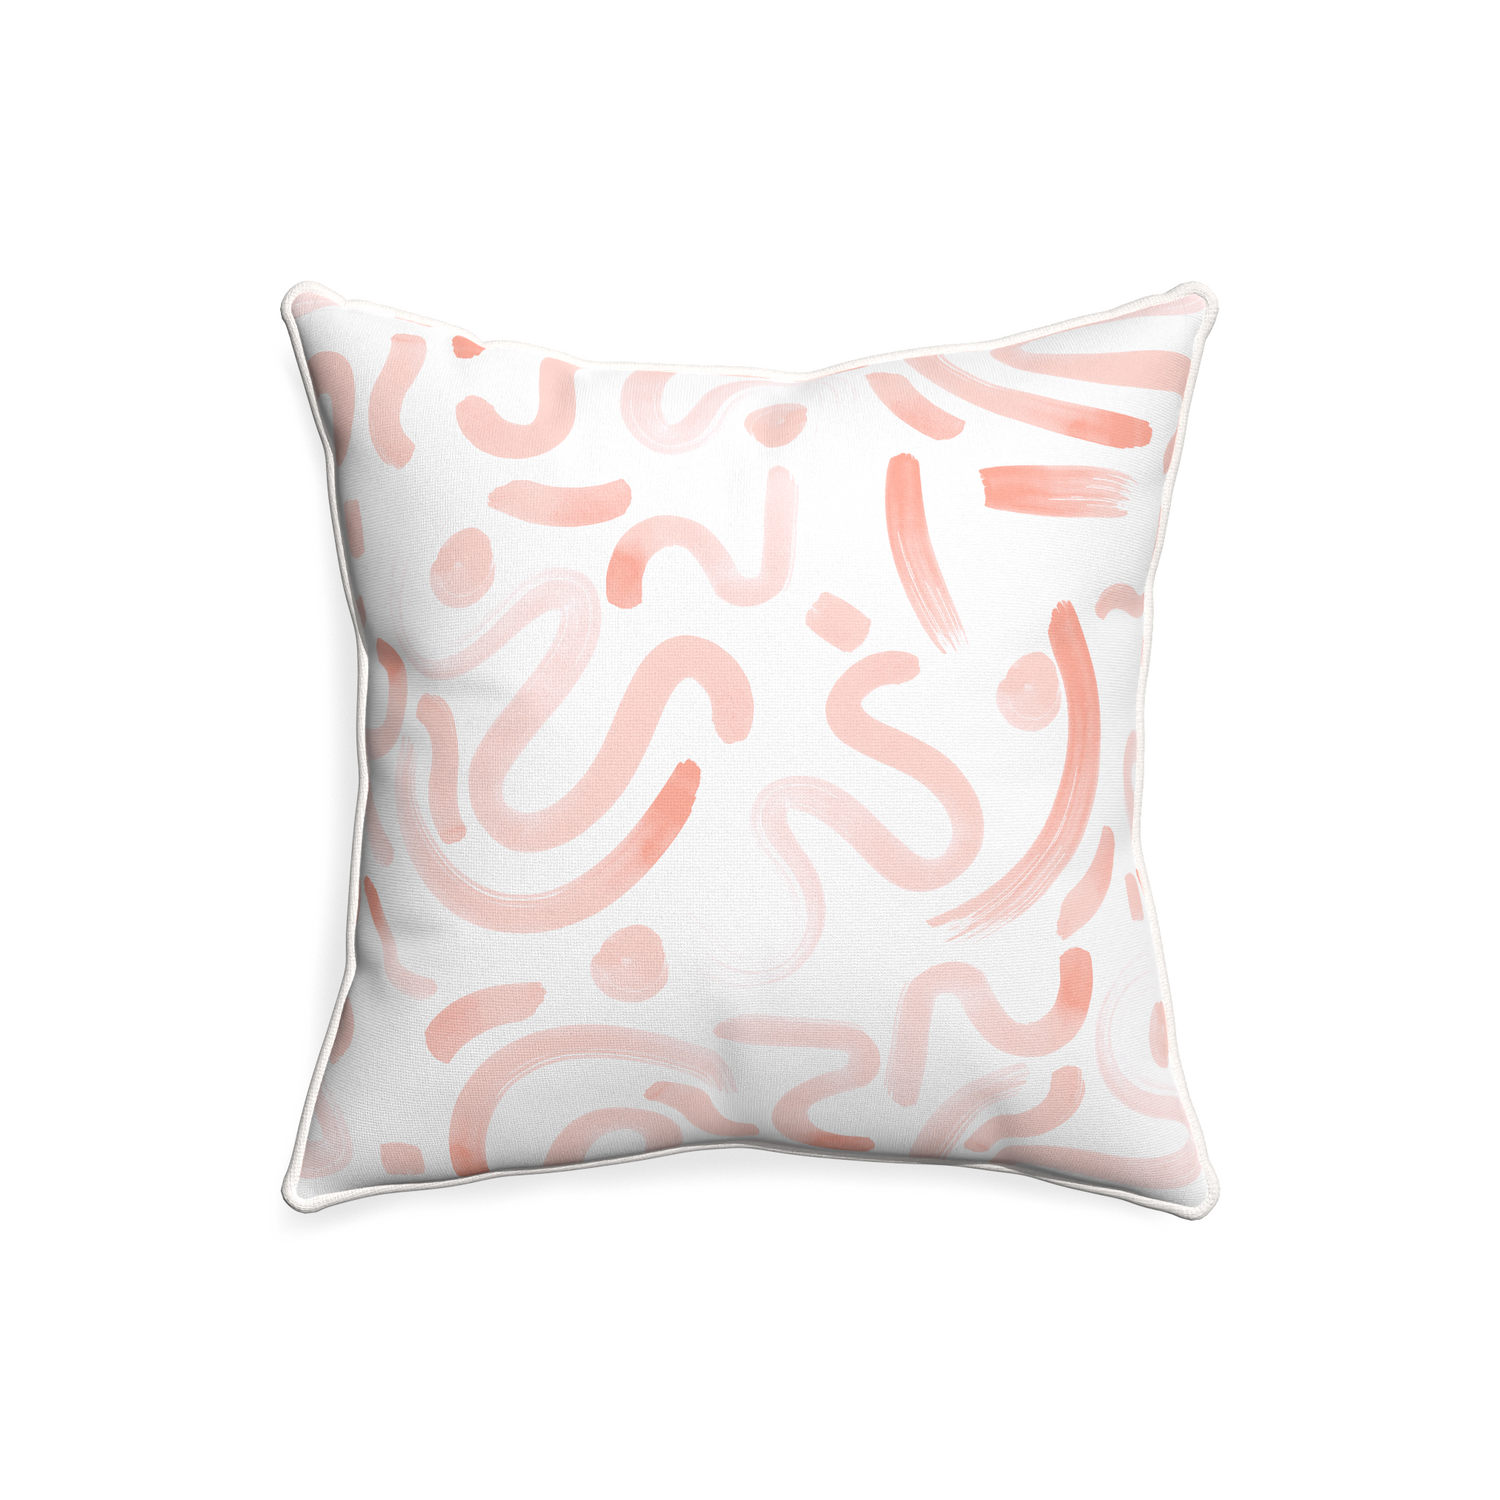 20-square hockney pink custom pink graphicpillow with snow piping on white background